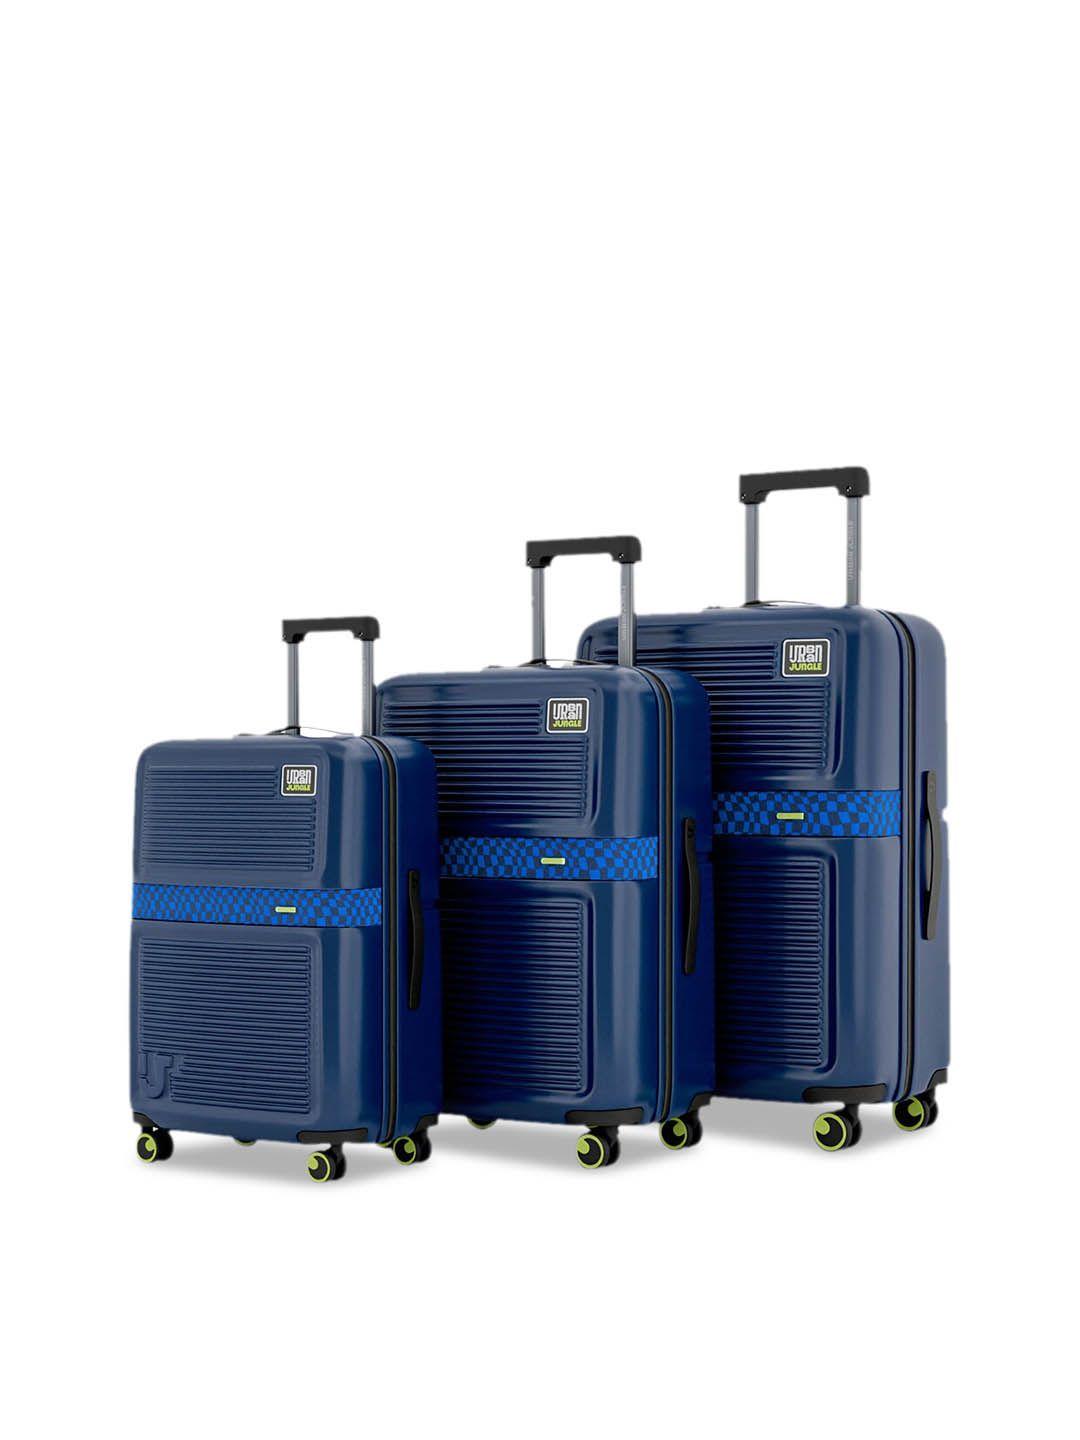 urban jungle set of 3 textured hard sided trolley suitcase